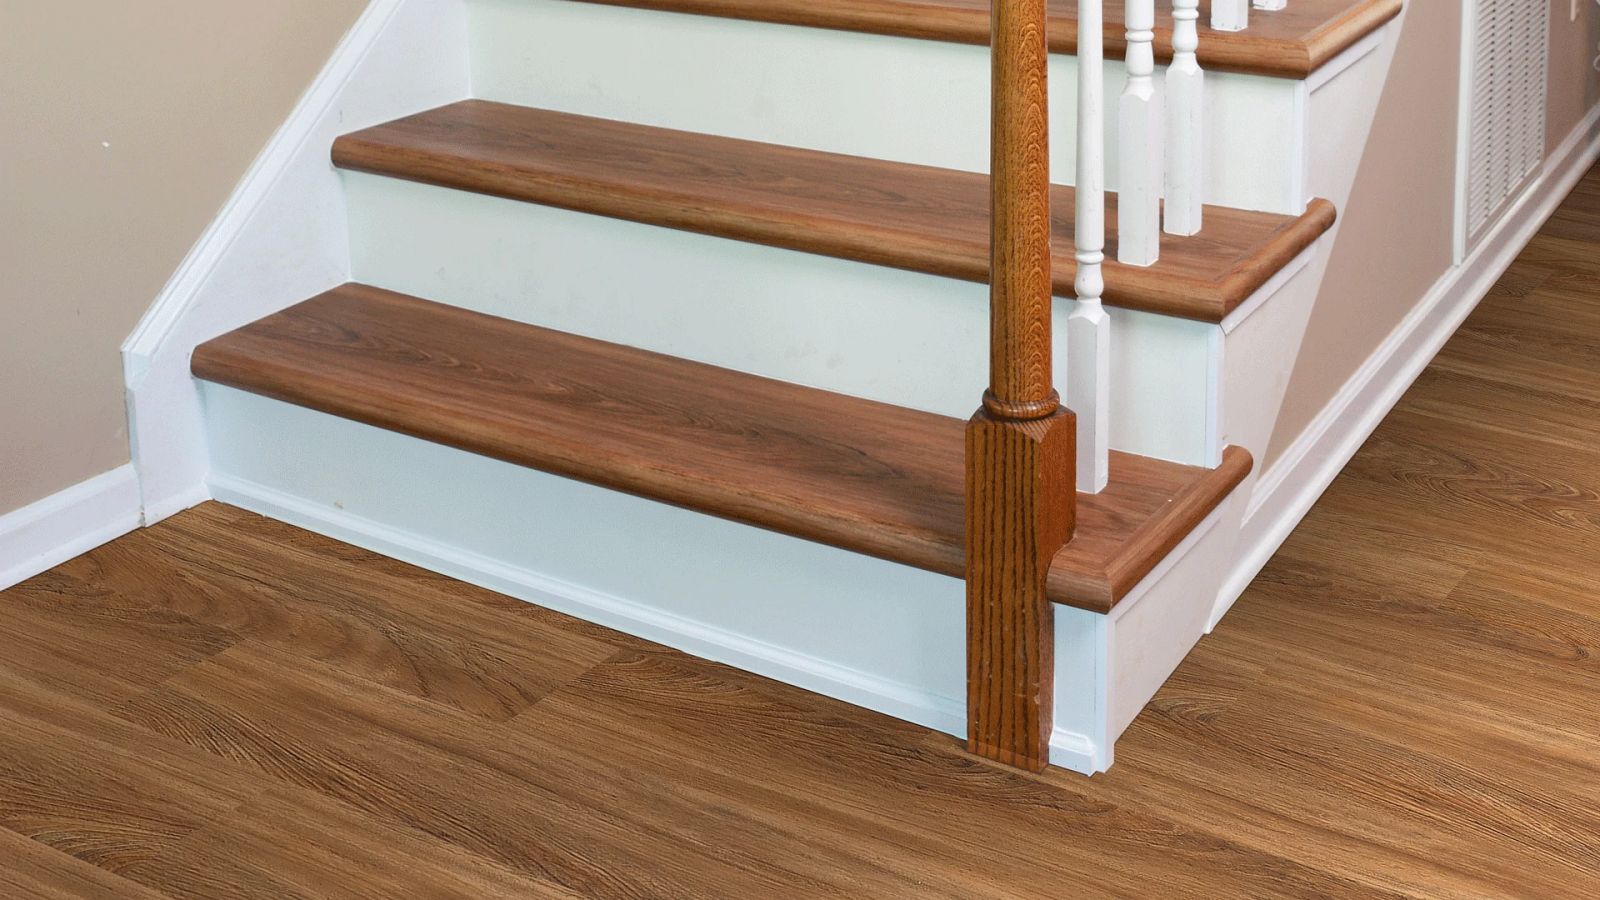 Shaw Floors, How To Install Floating Vinyl Flooring On Stairs